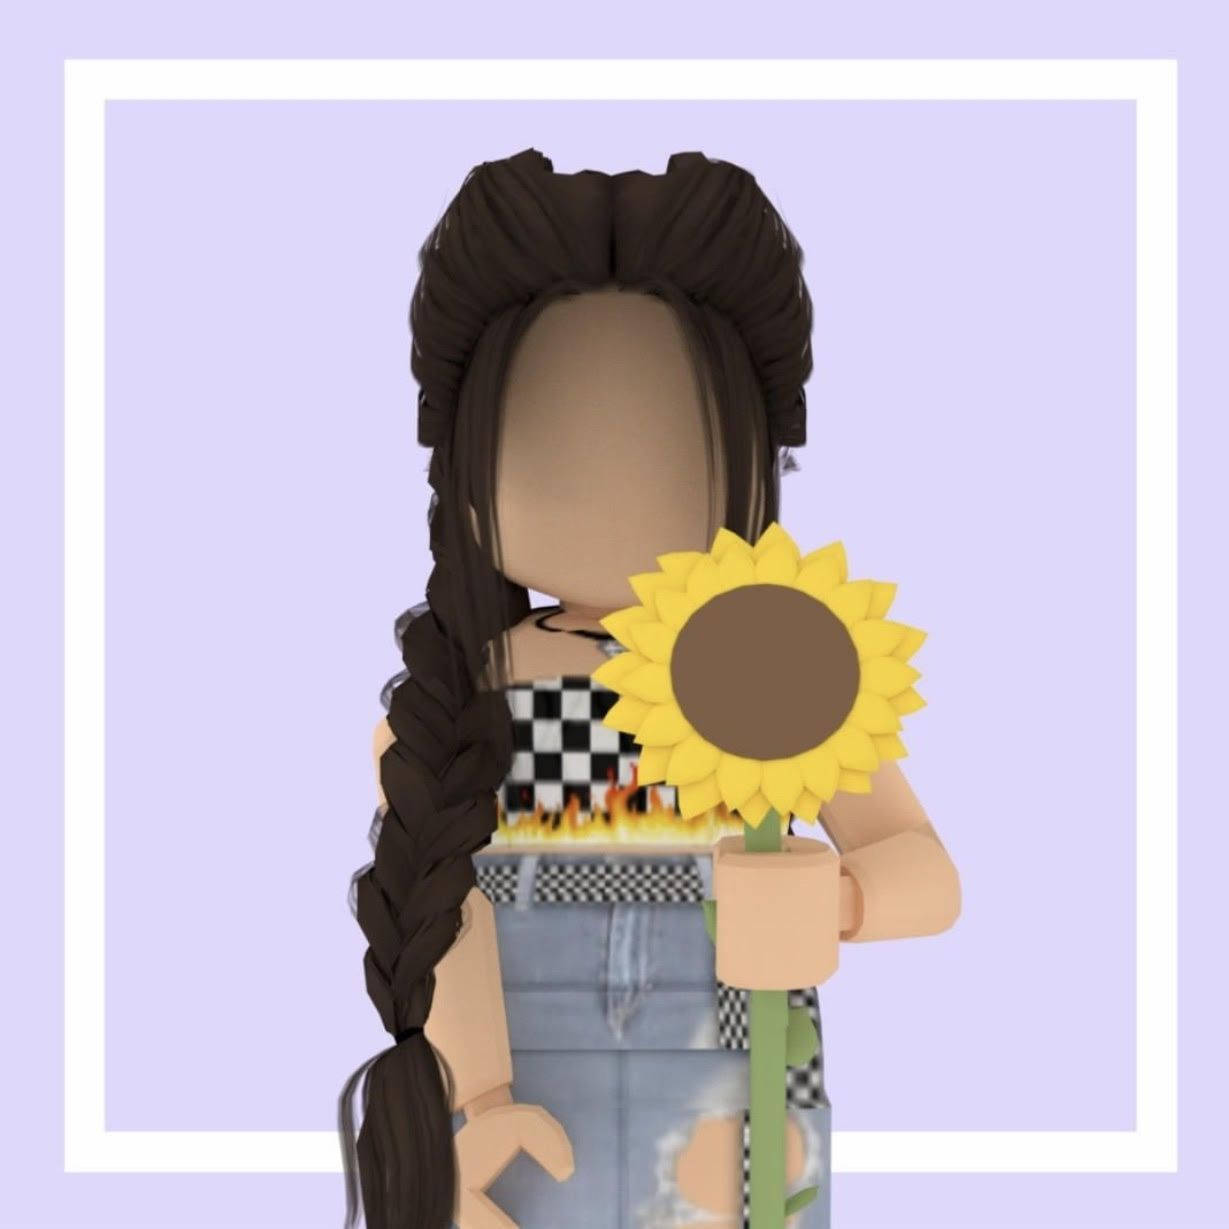 Aesthetic Roblox Girl Holding A Big Sunflower